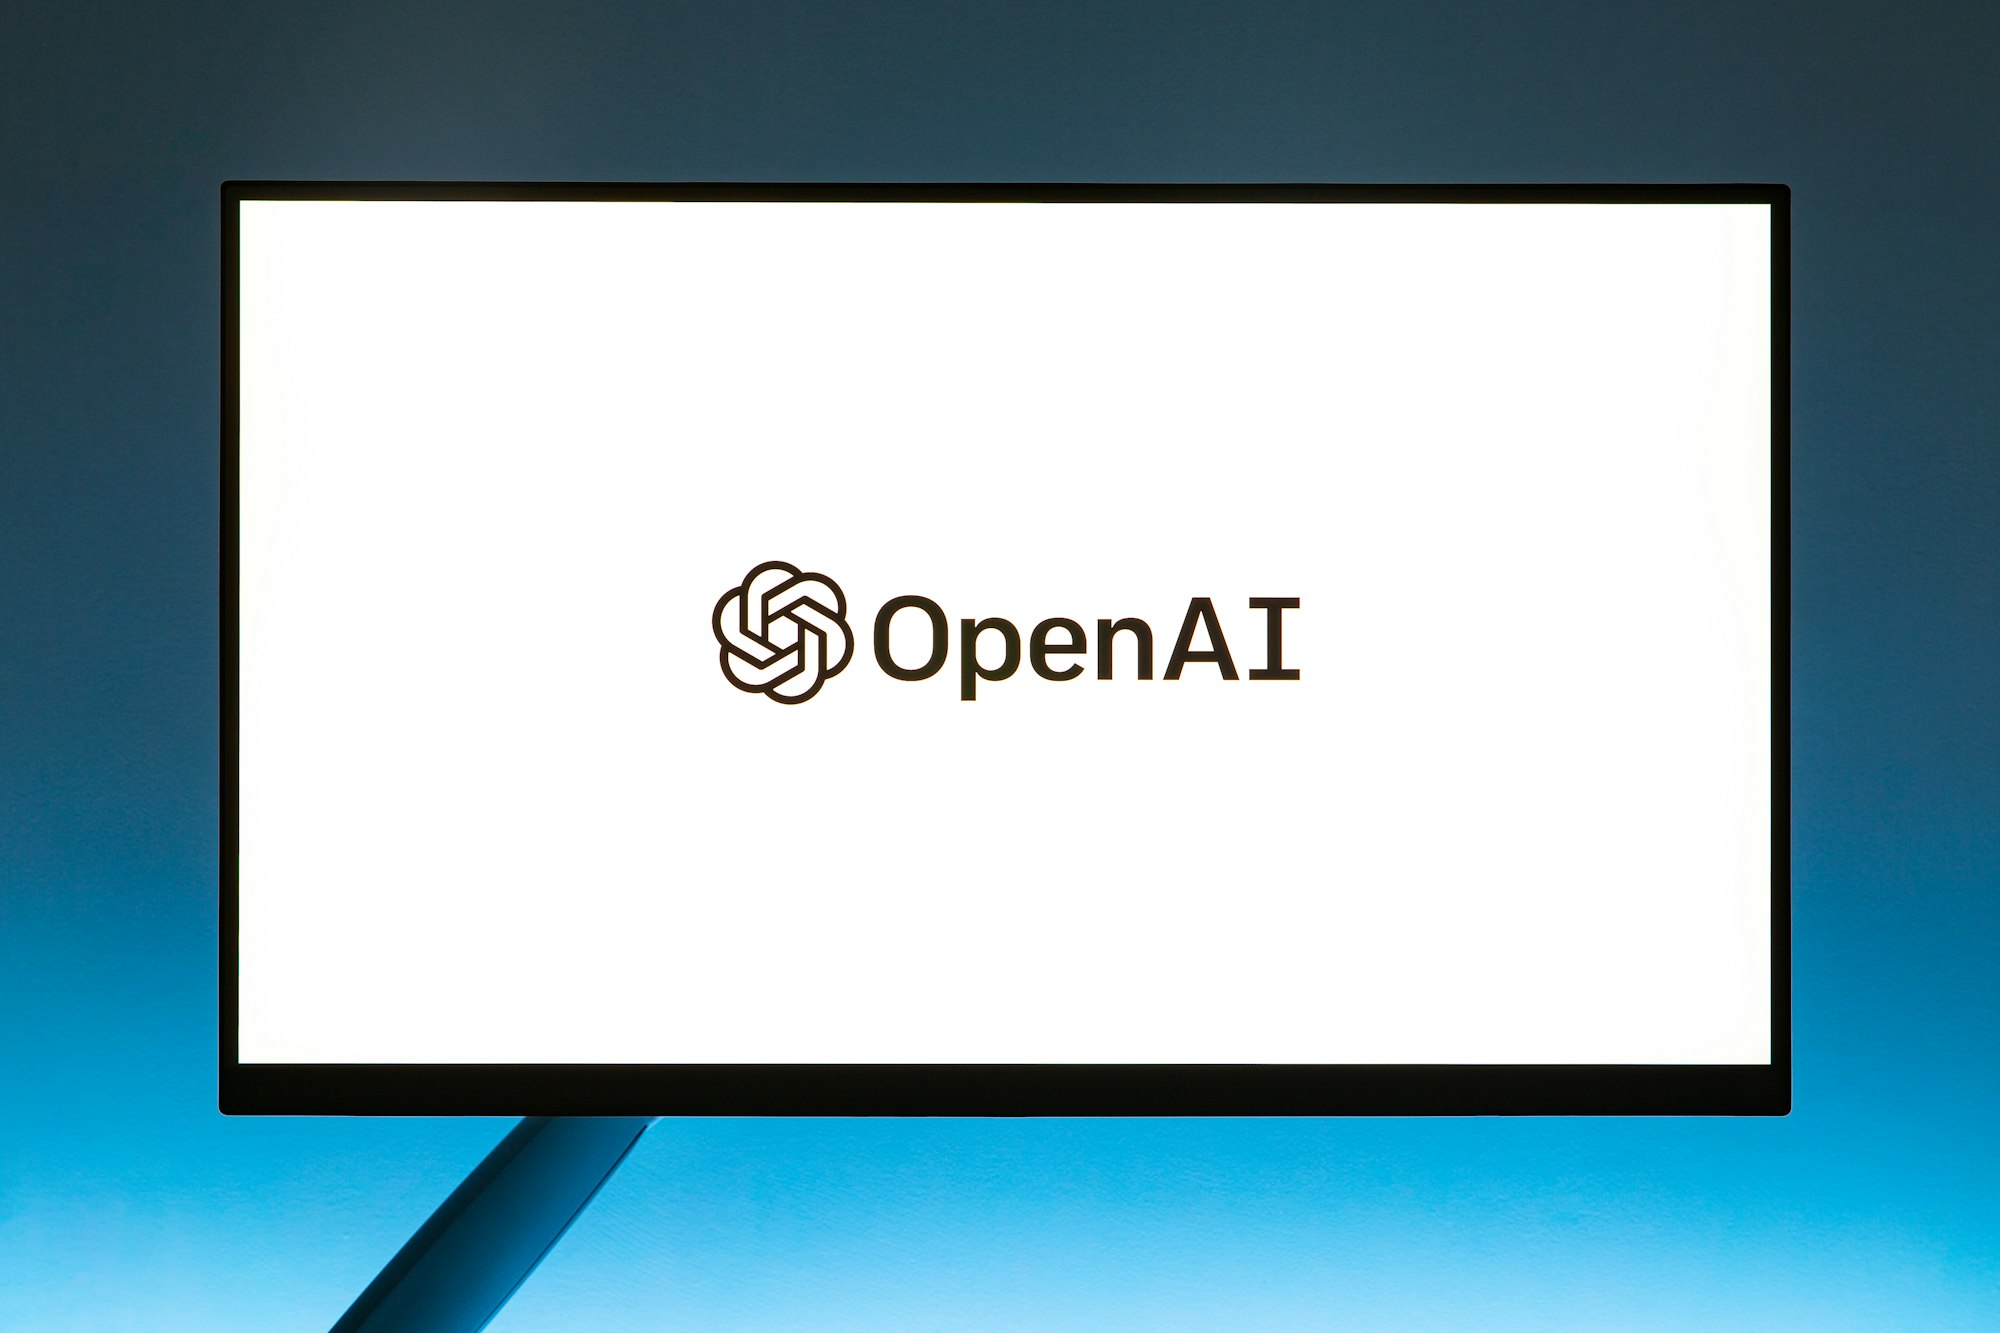 How Immediately Exposed Is Google From New Competition With Openai?